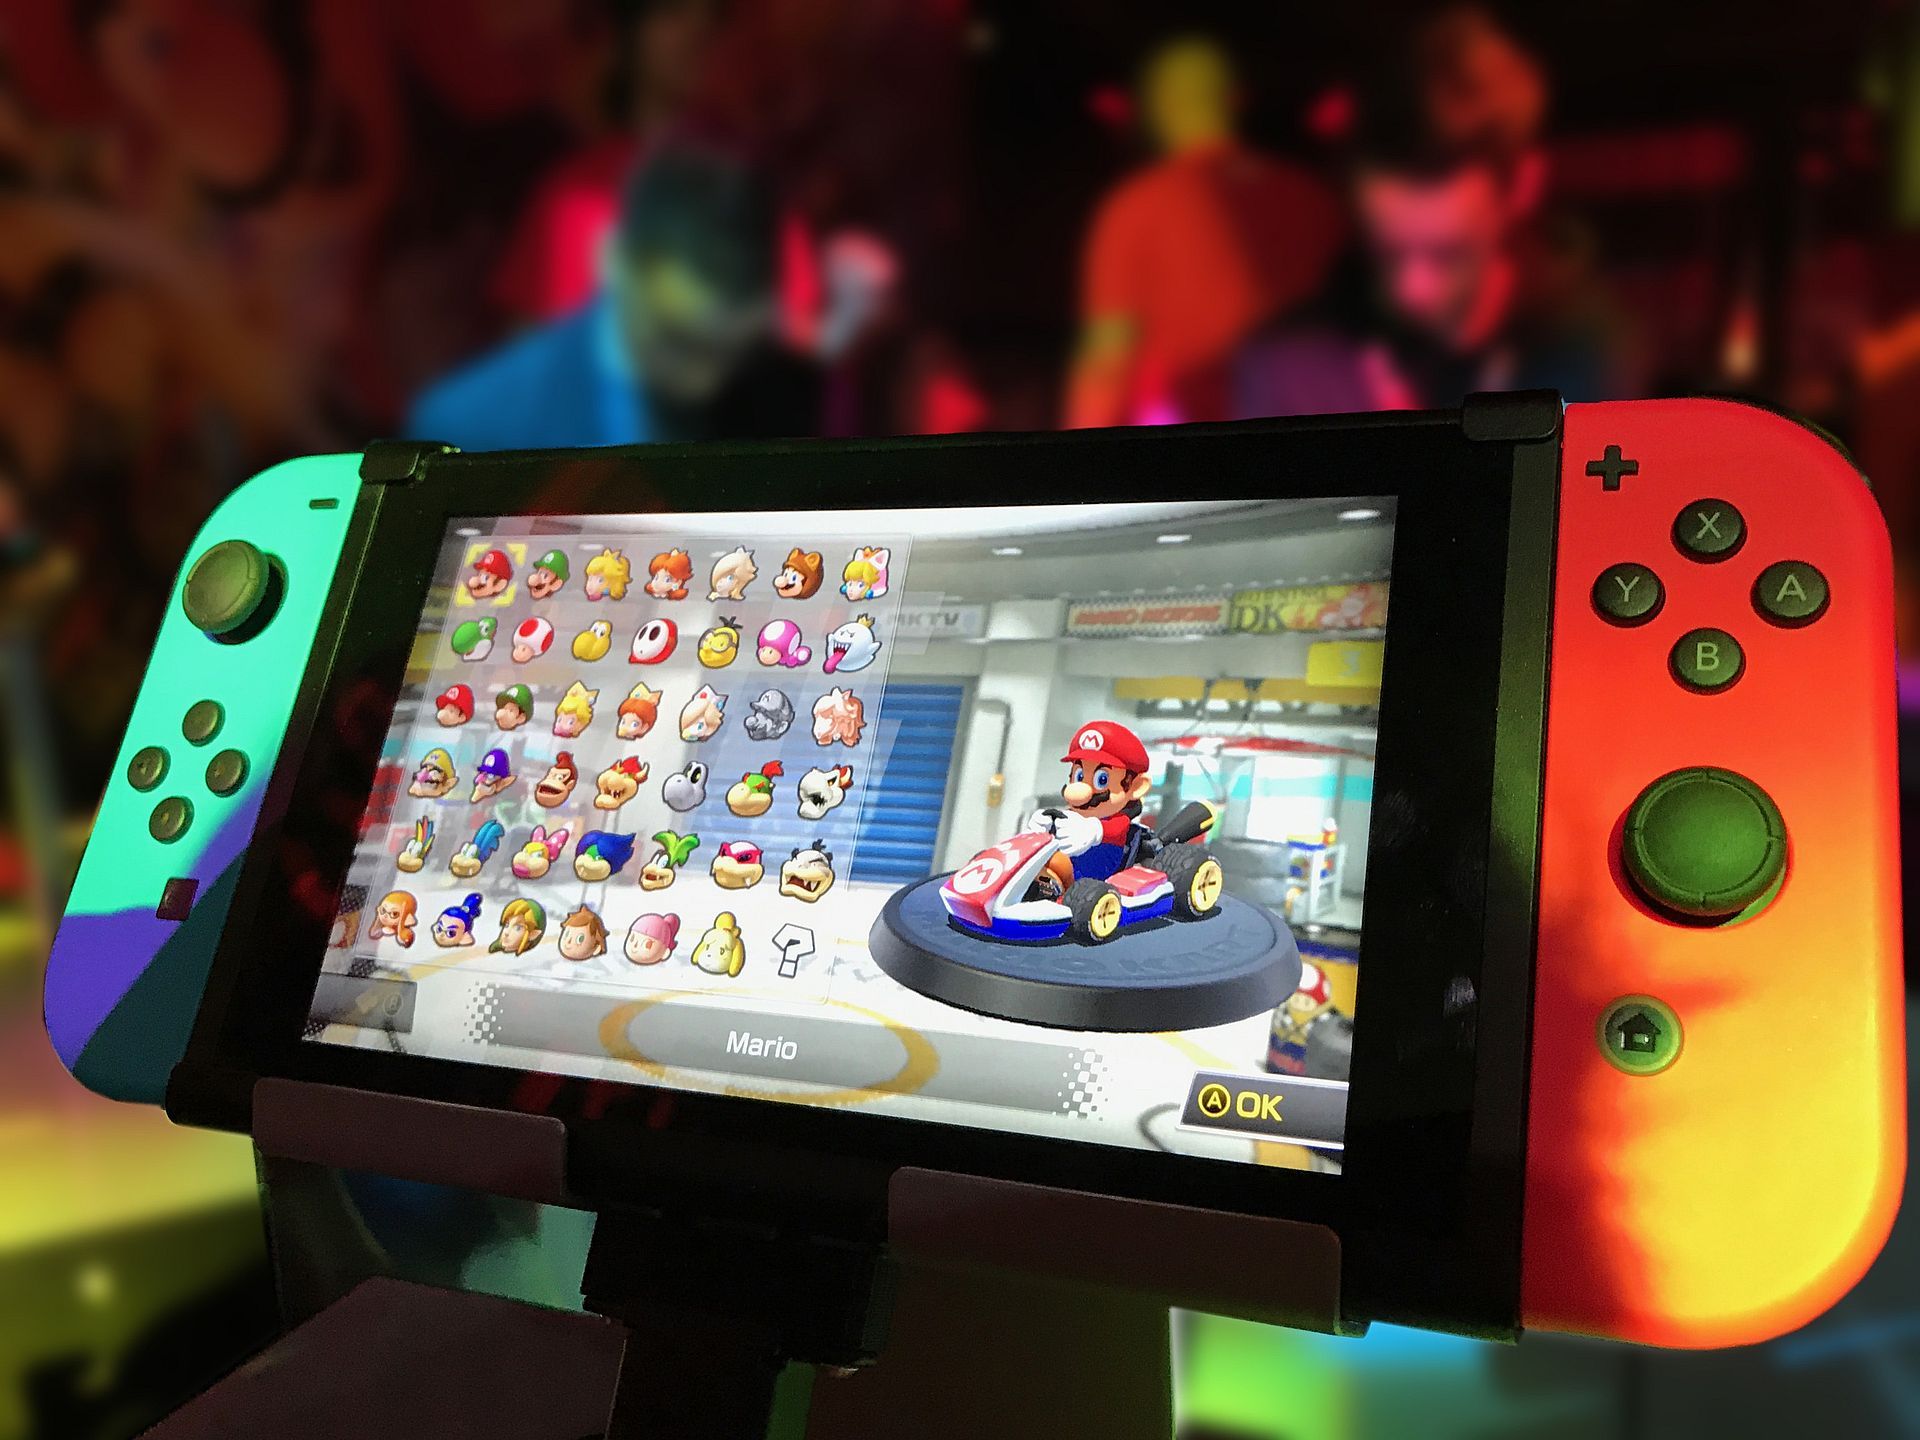 Nintendo Switch 2 patent: A glimpse into exciting changes